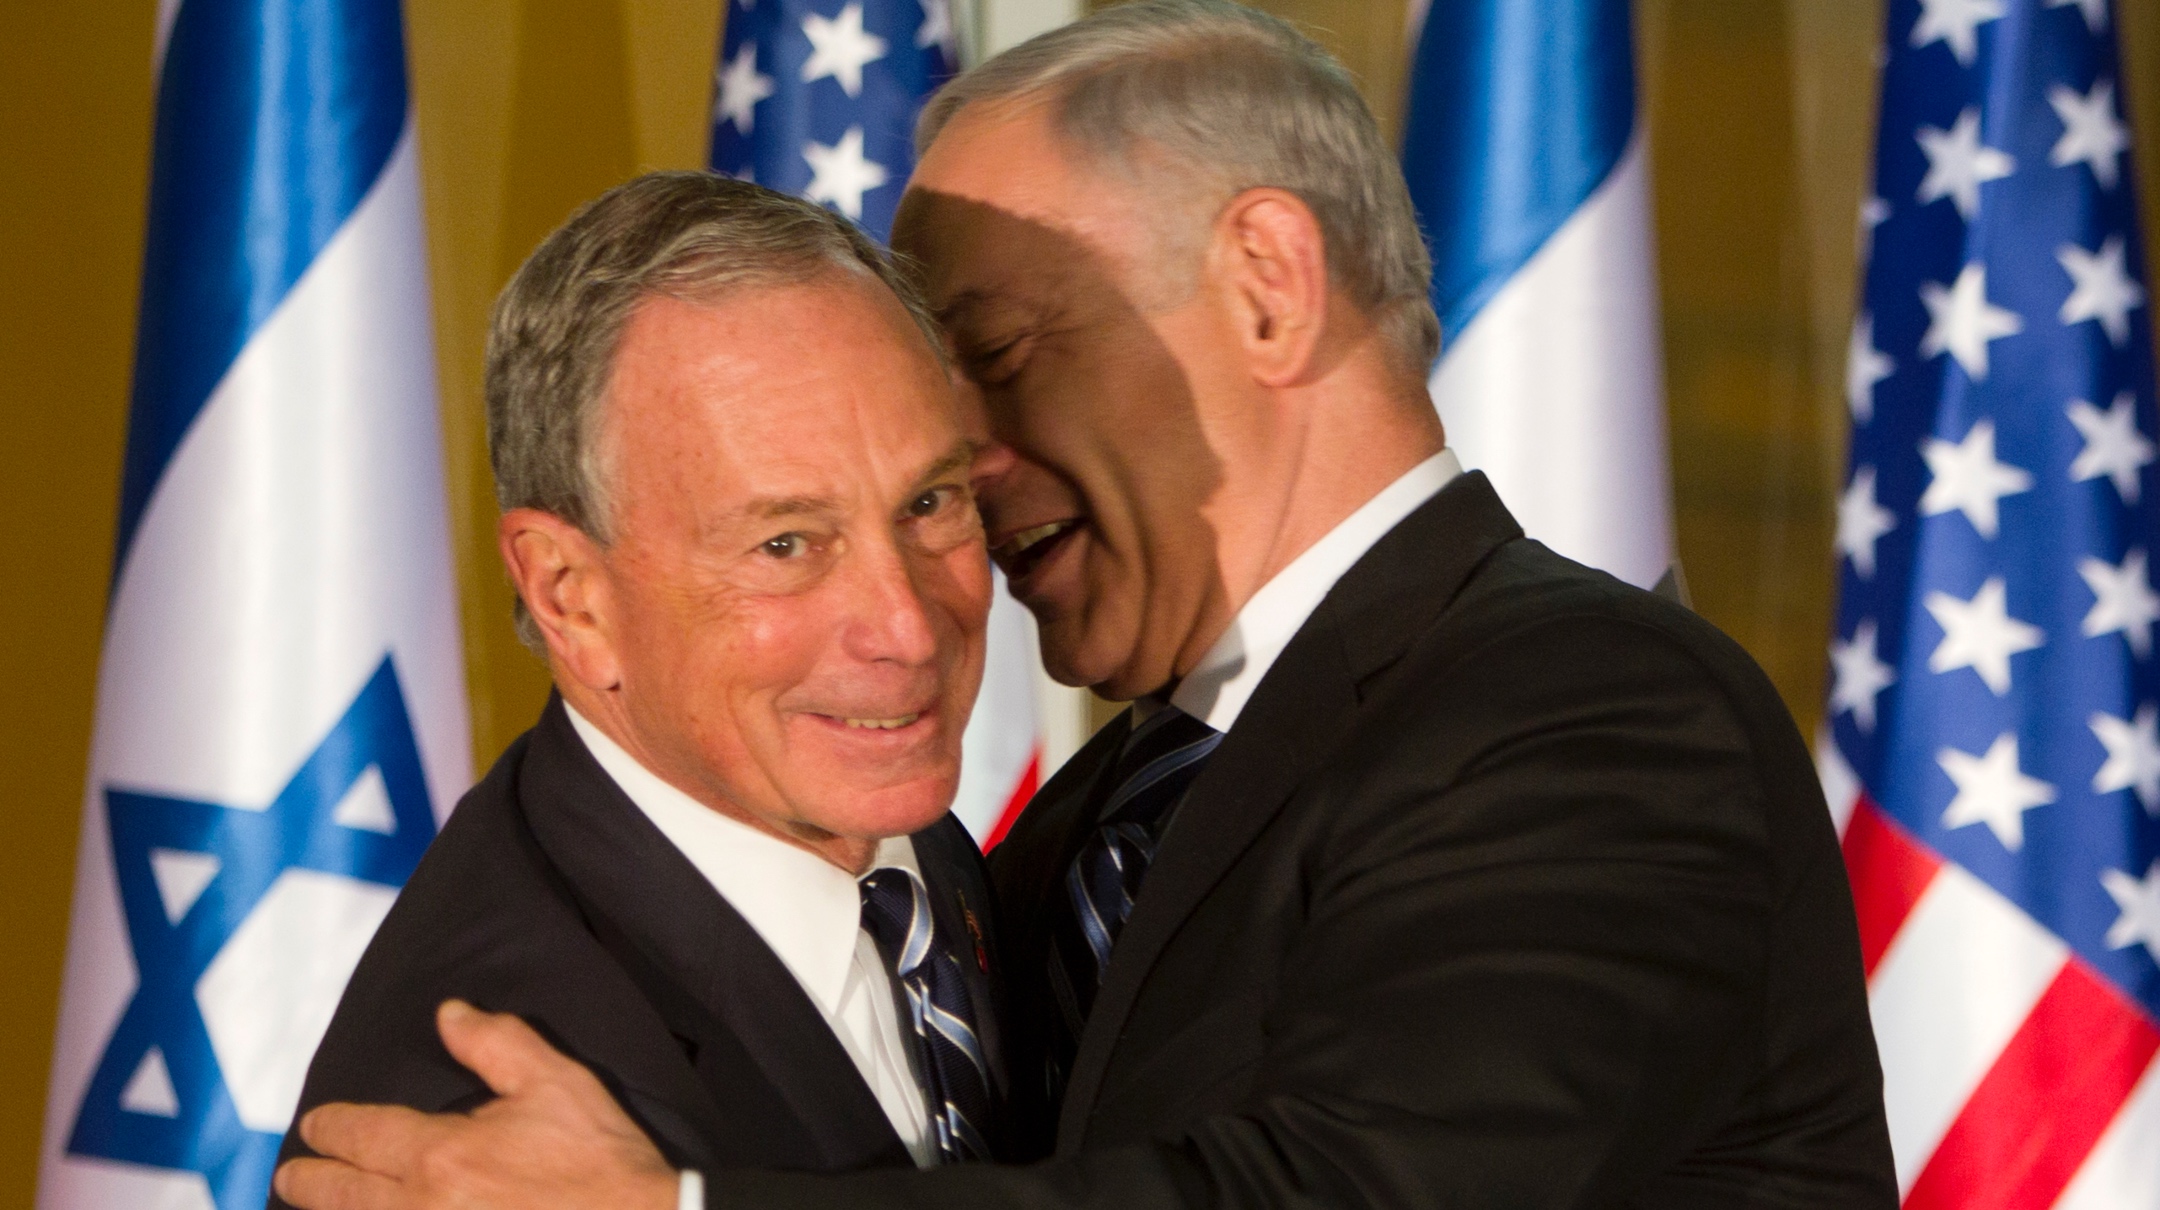 New York City Mayor Michael Bloomberg and Israeli Prime Minister Benjamin Netanyahu embrace after they both made short statements at the prime minister’s residence in Jerusalem, Oct 23, 2011. (Jim Hollander-Pool/Getty Images)